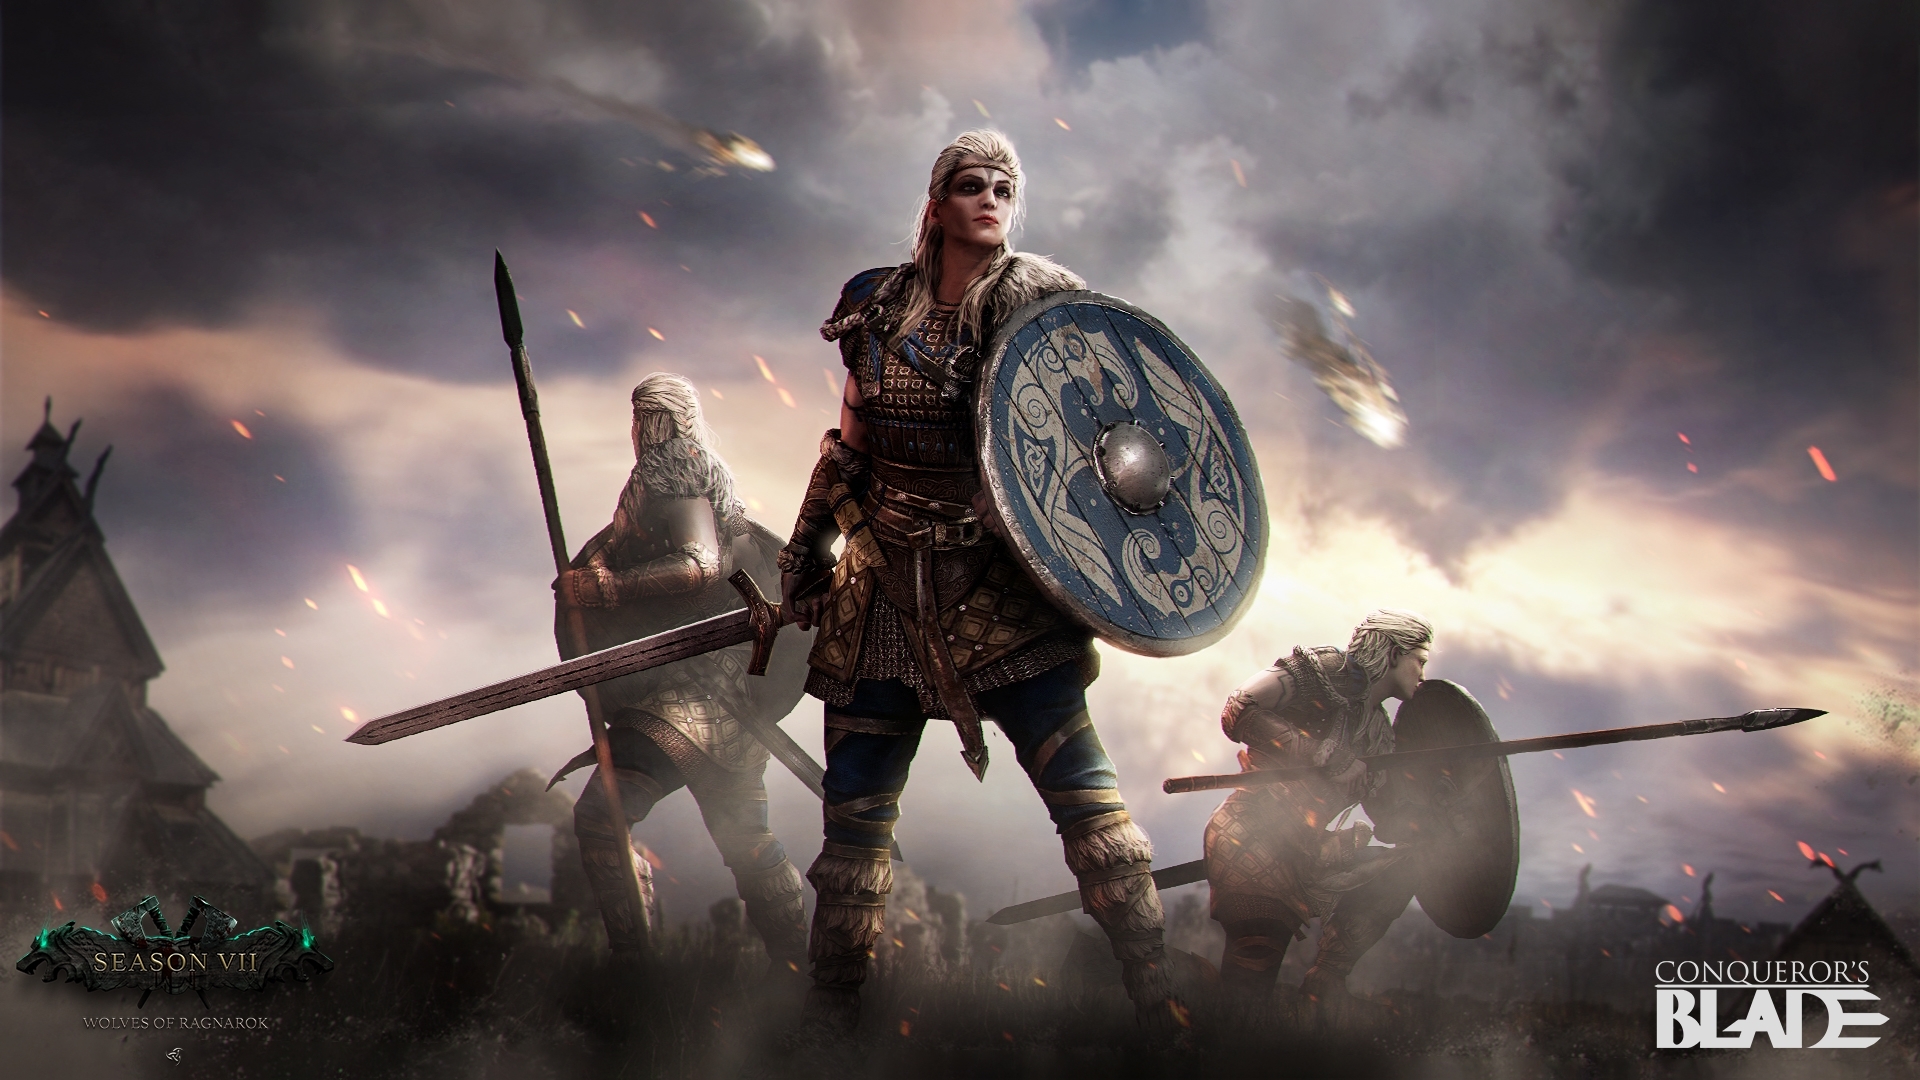 Unlock Shieldmaidens - Military - Vikings: War of clans - Guide,  description, help for the game / English version